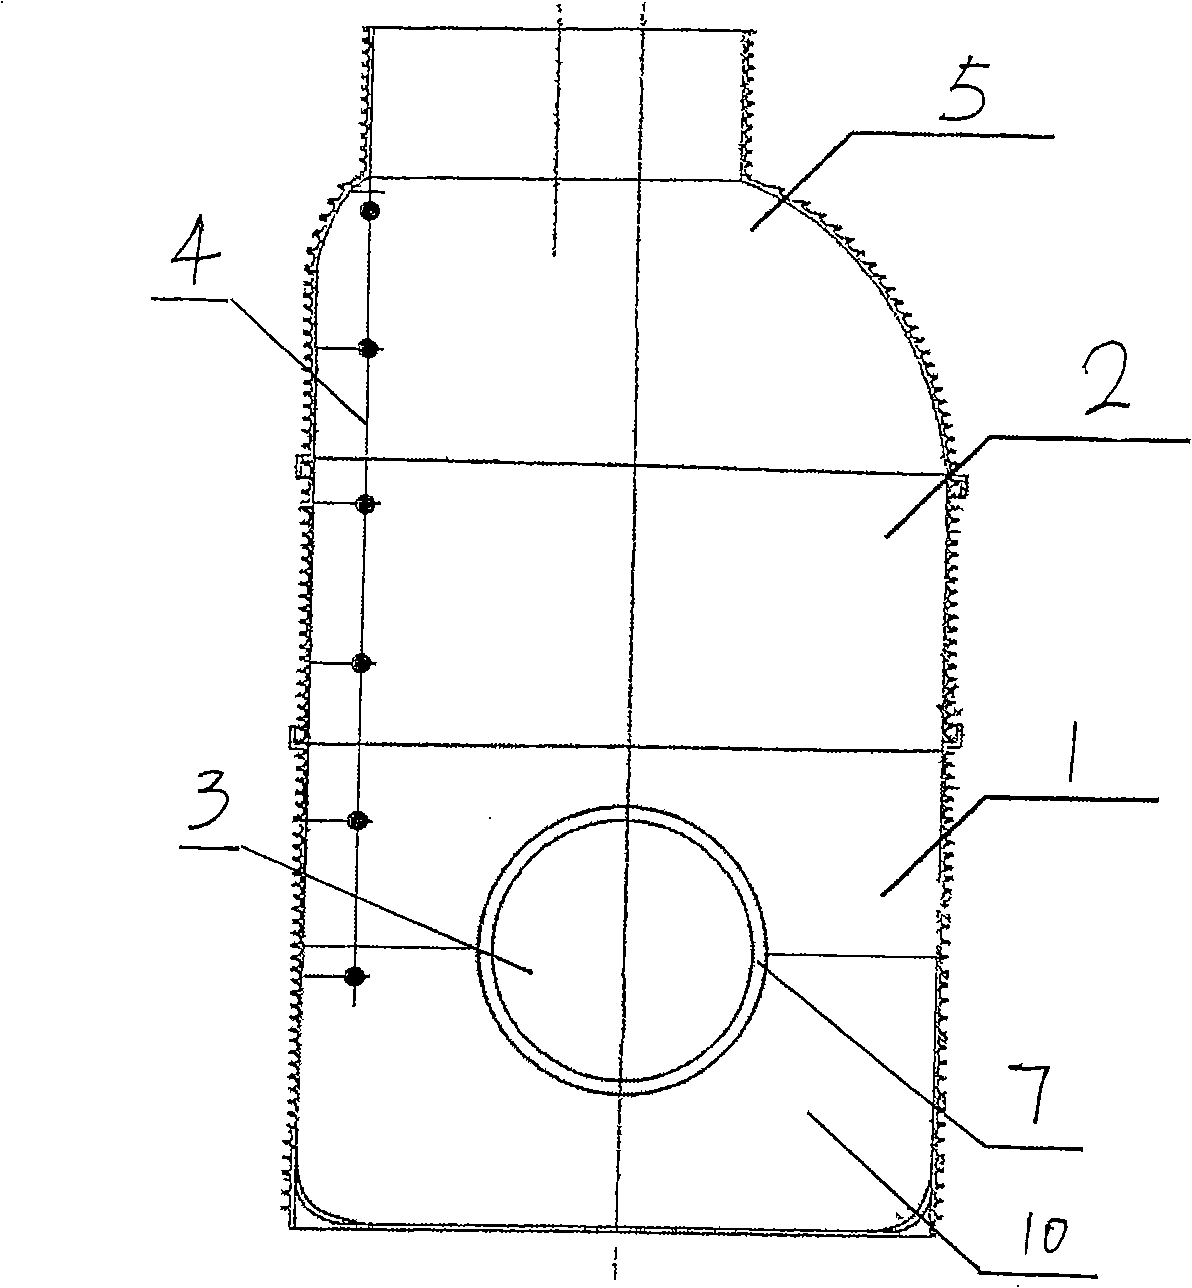 Faucet built-in type inspection shaft